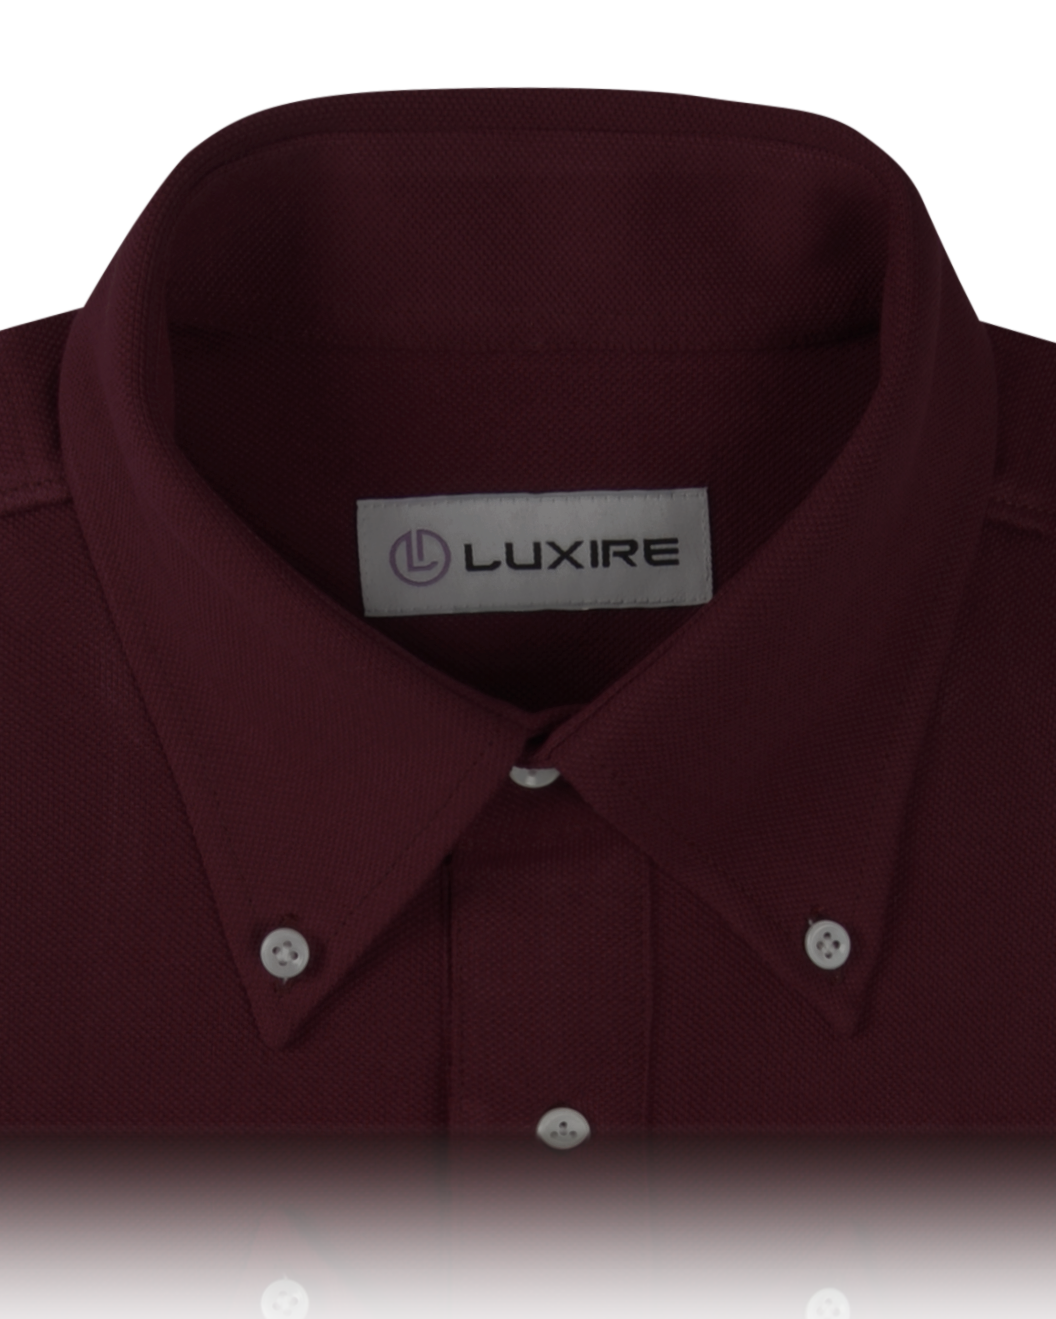 Collar of the custom oxford polo shirt for men by Luxire in maroon